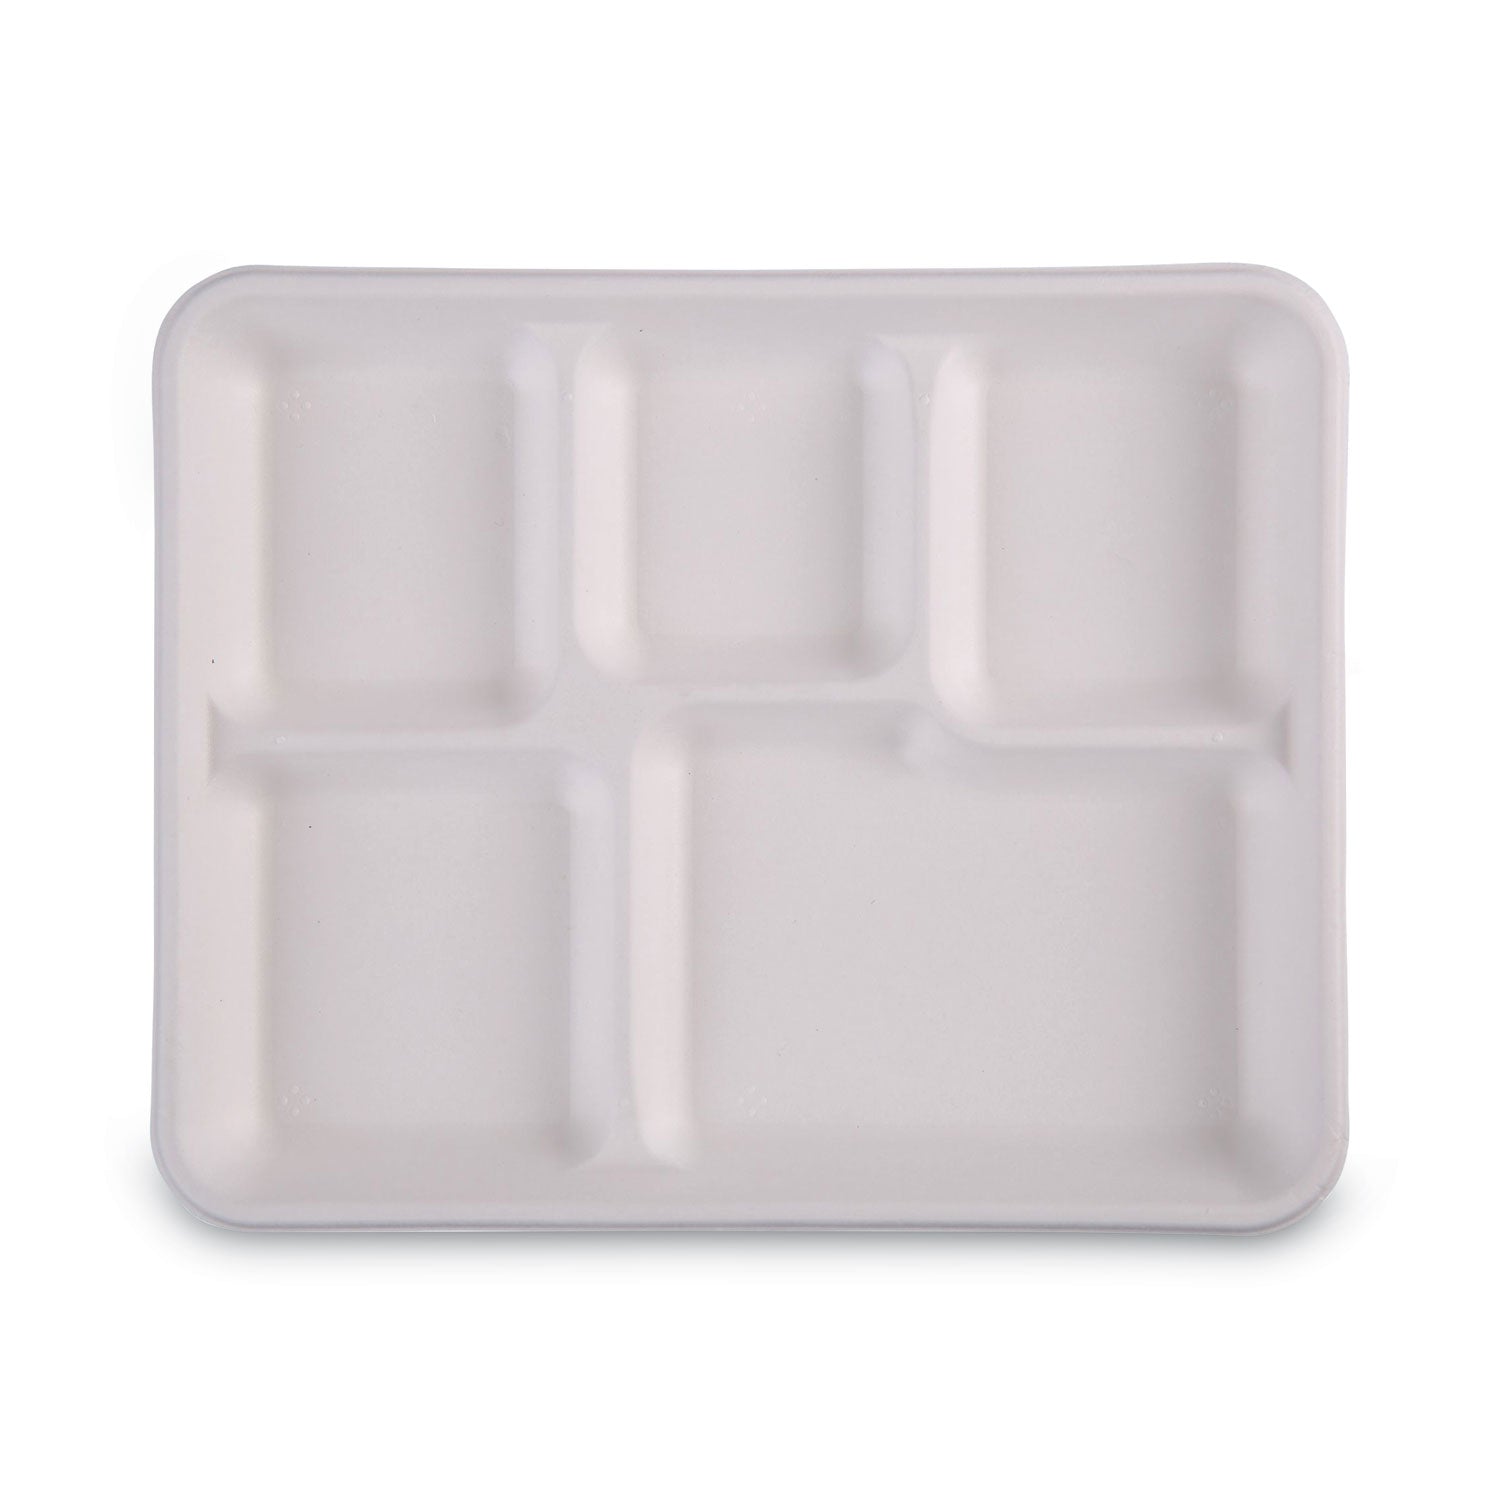 bagasse-dinnerware-5-compartment-tray-10-x-8-white-500-carton_bwktraywf128 - 7